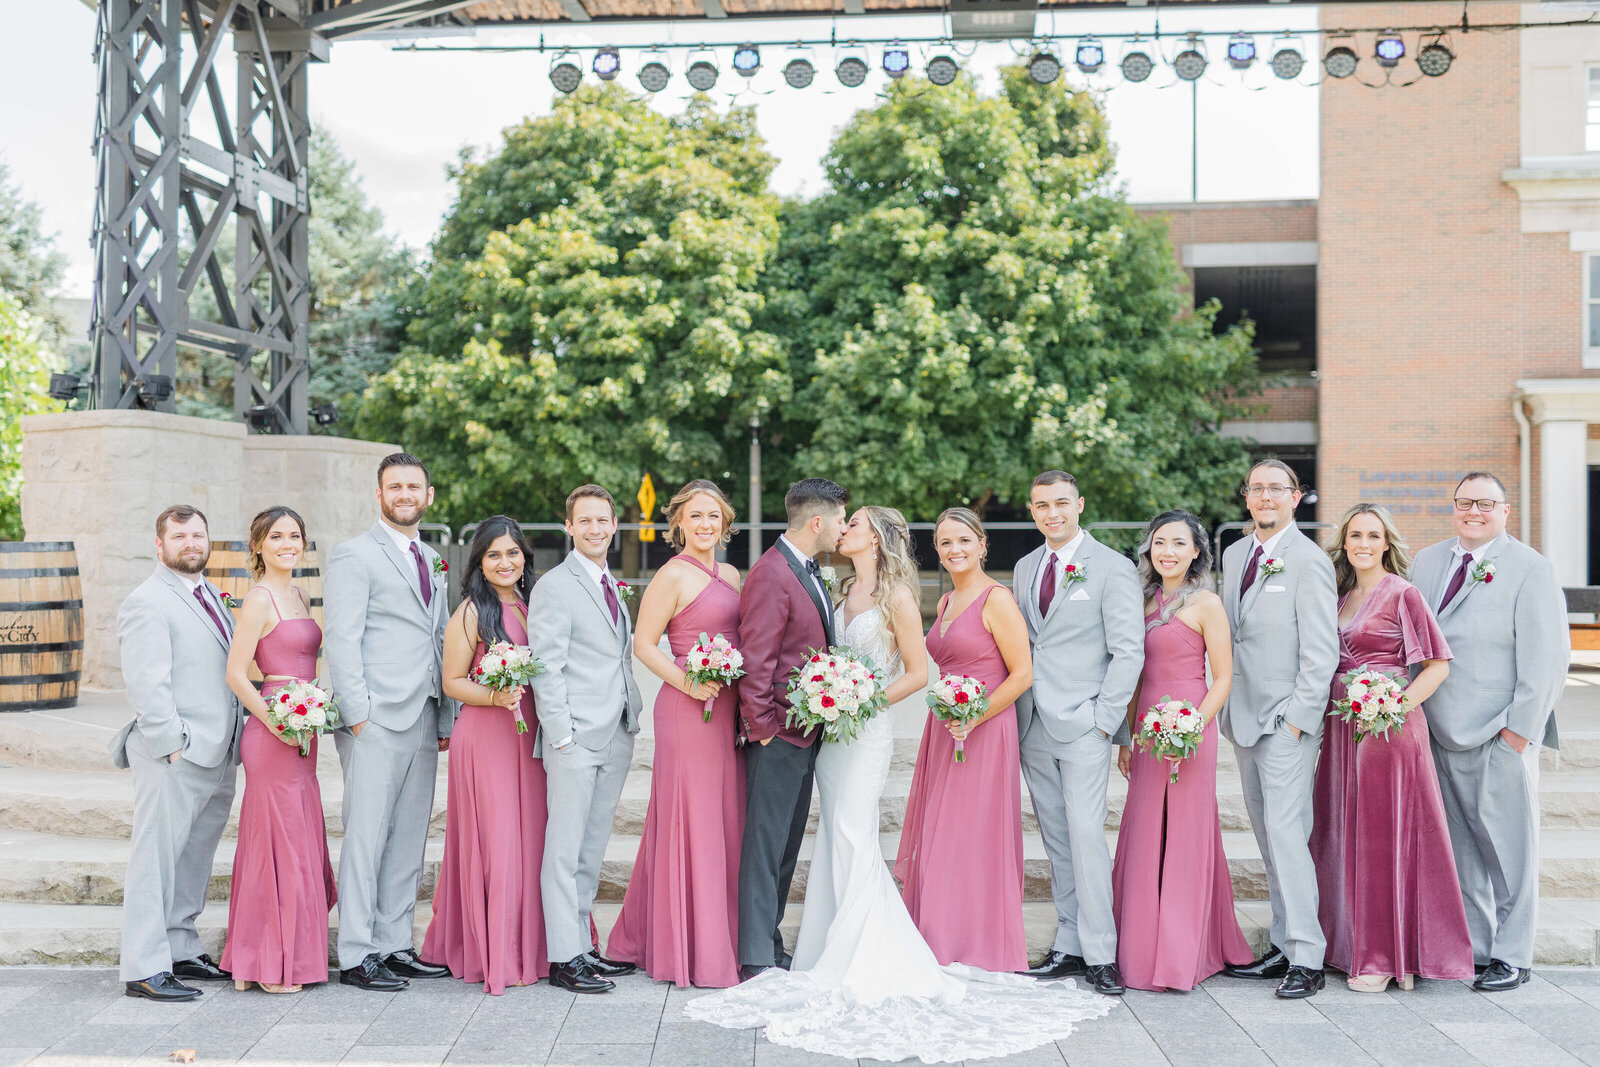 Bride and groom  stand with their bridal party. There is a bridesmaid, then groomsmen, and they alternate accordingly. The bridesmaids are in rose and the groomsmen in grey.